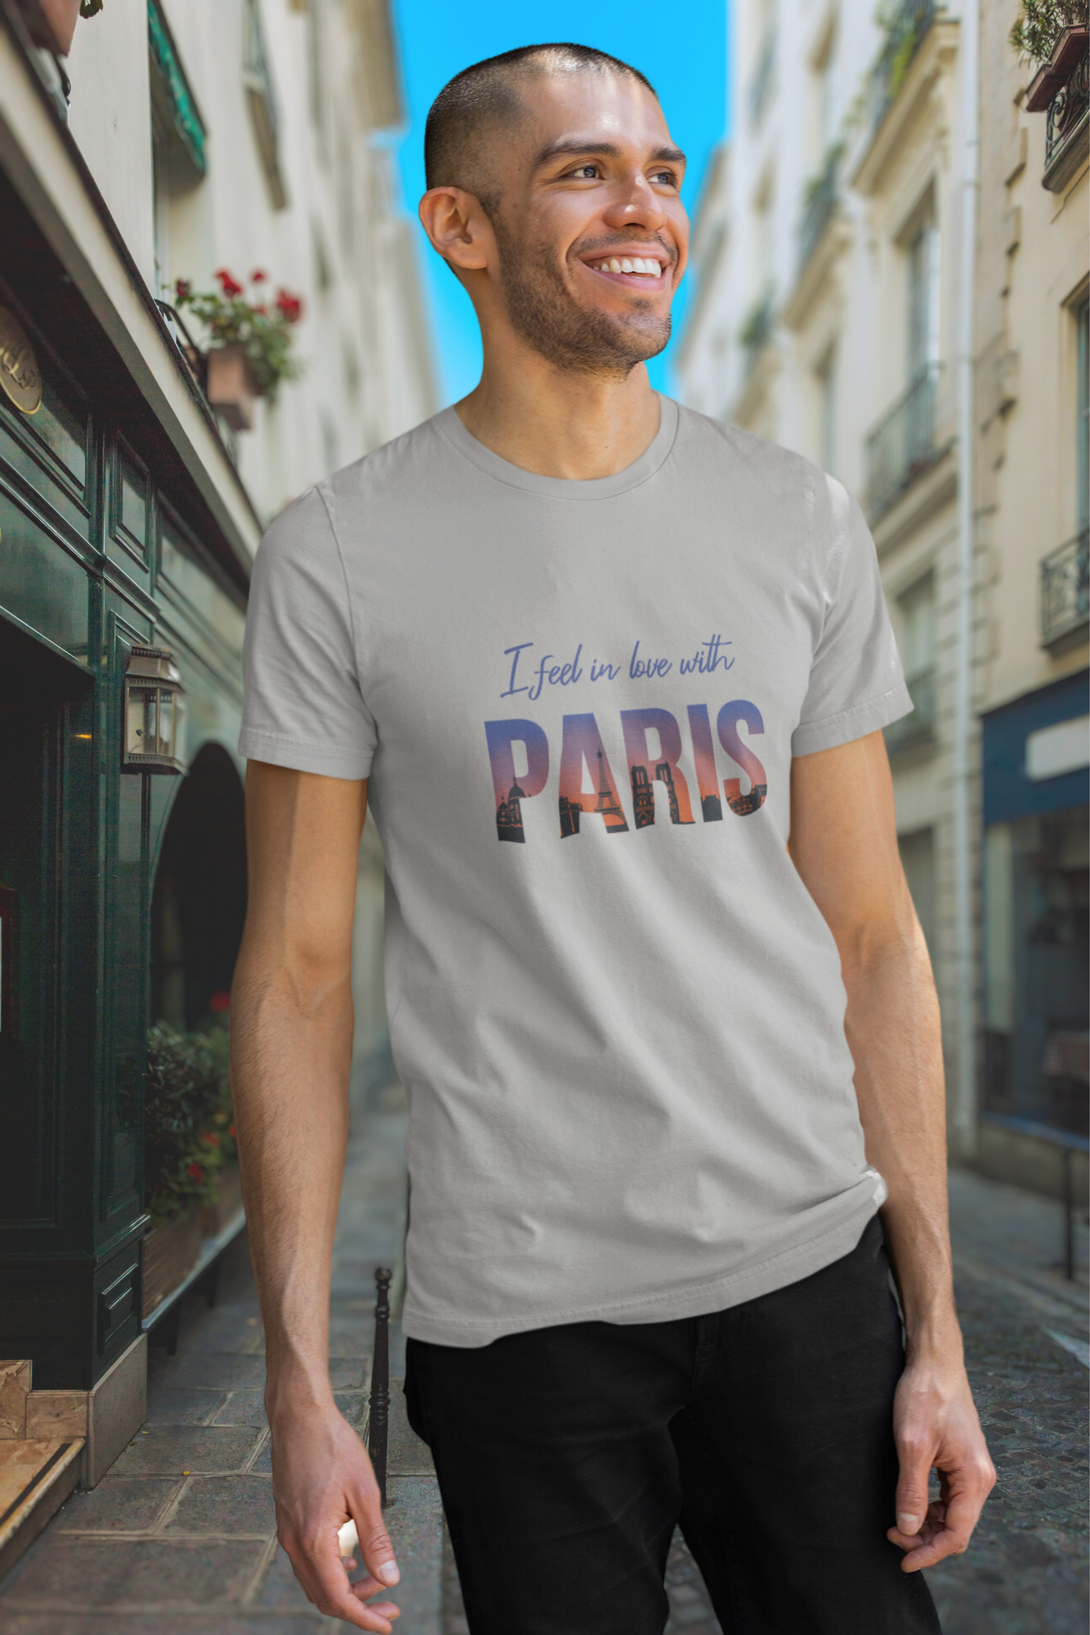 In Love With Paris Printed T-Shirt For Men - WowWaves - 4